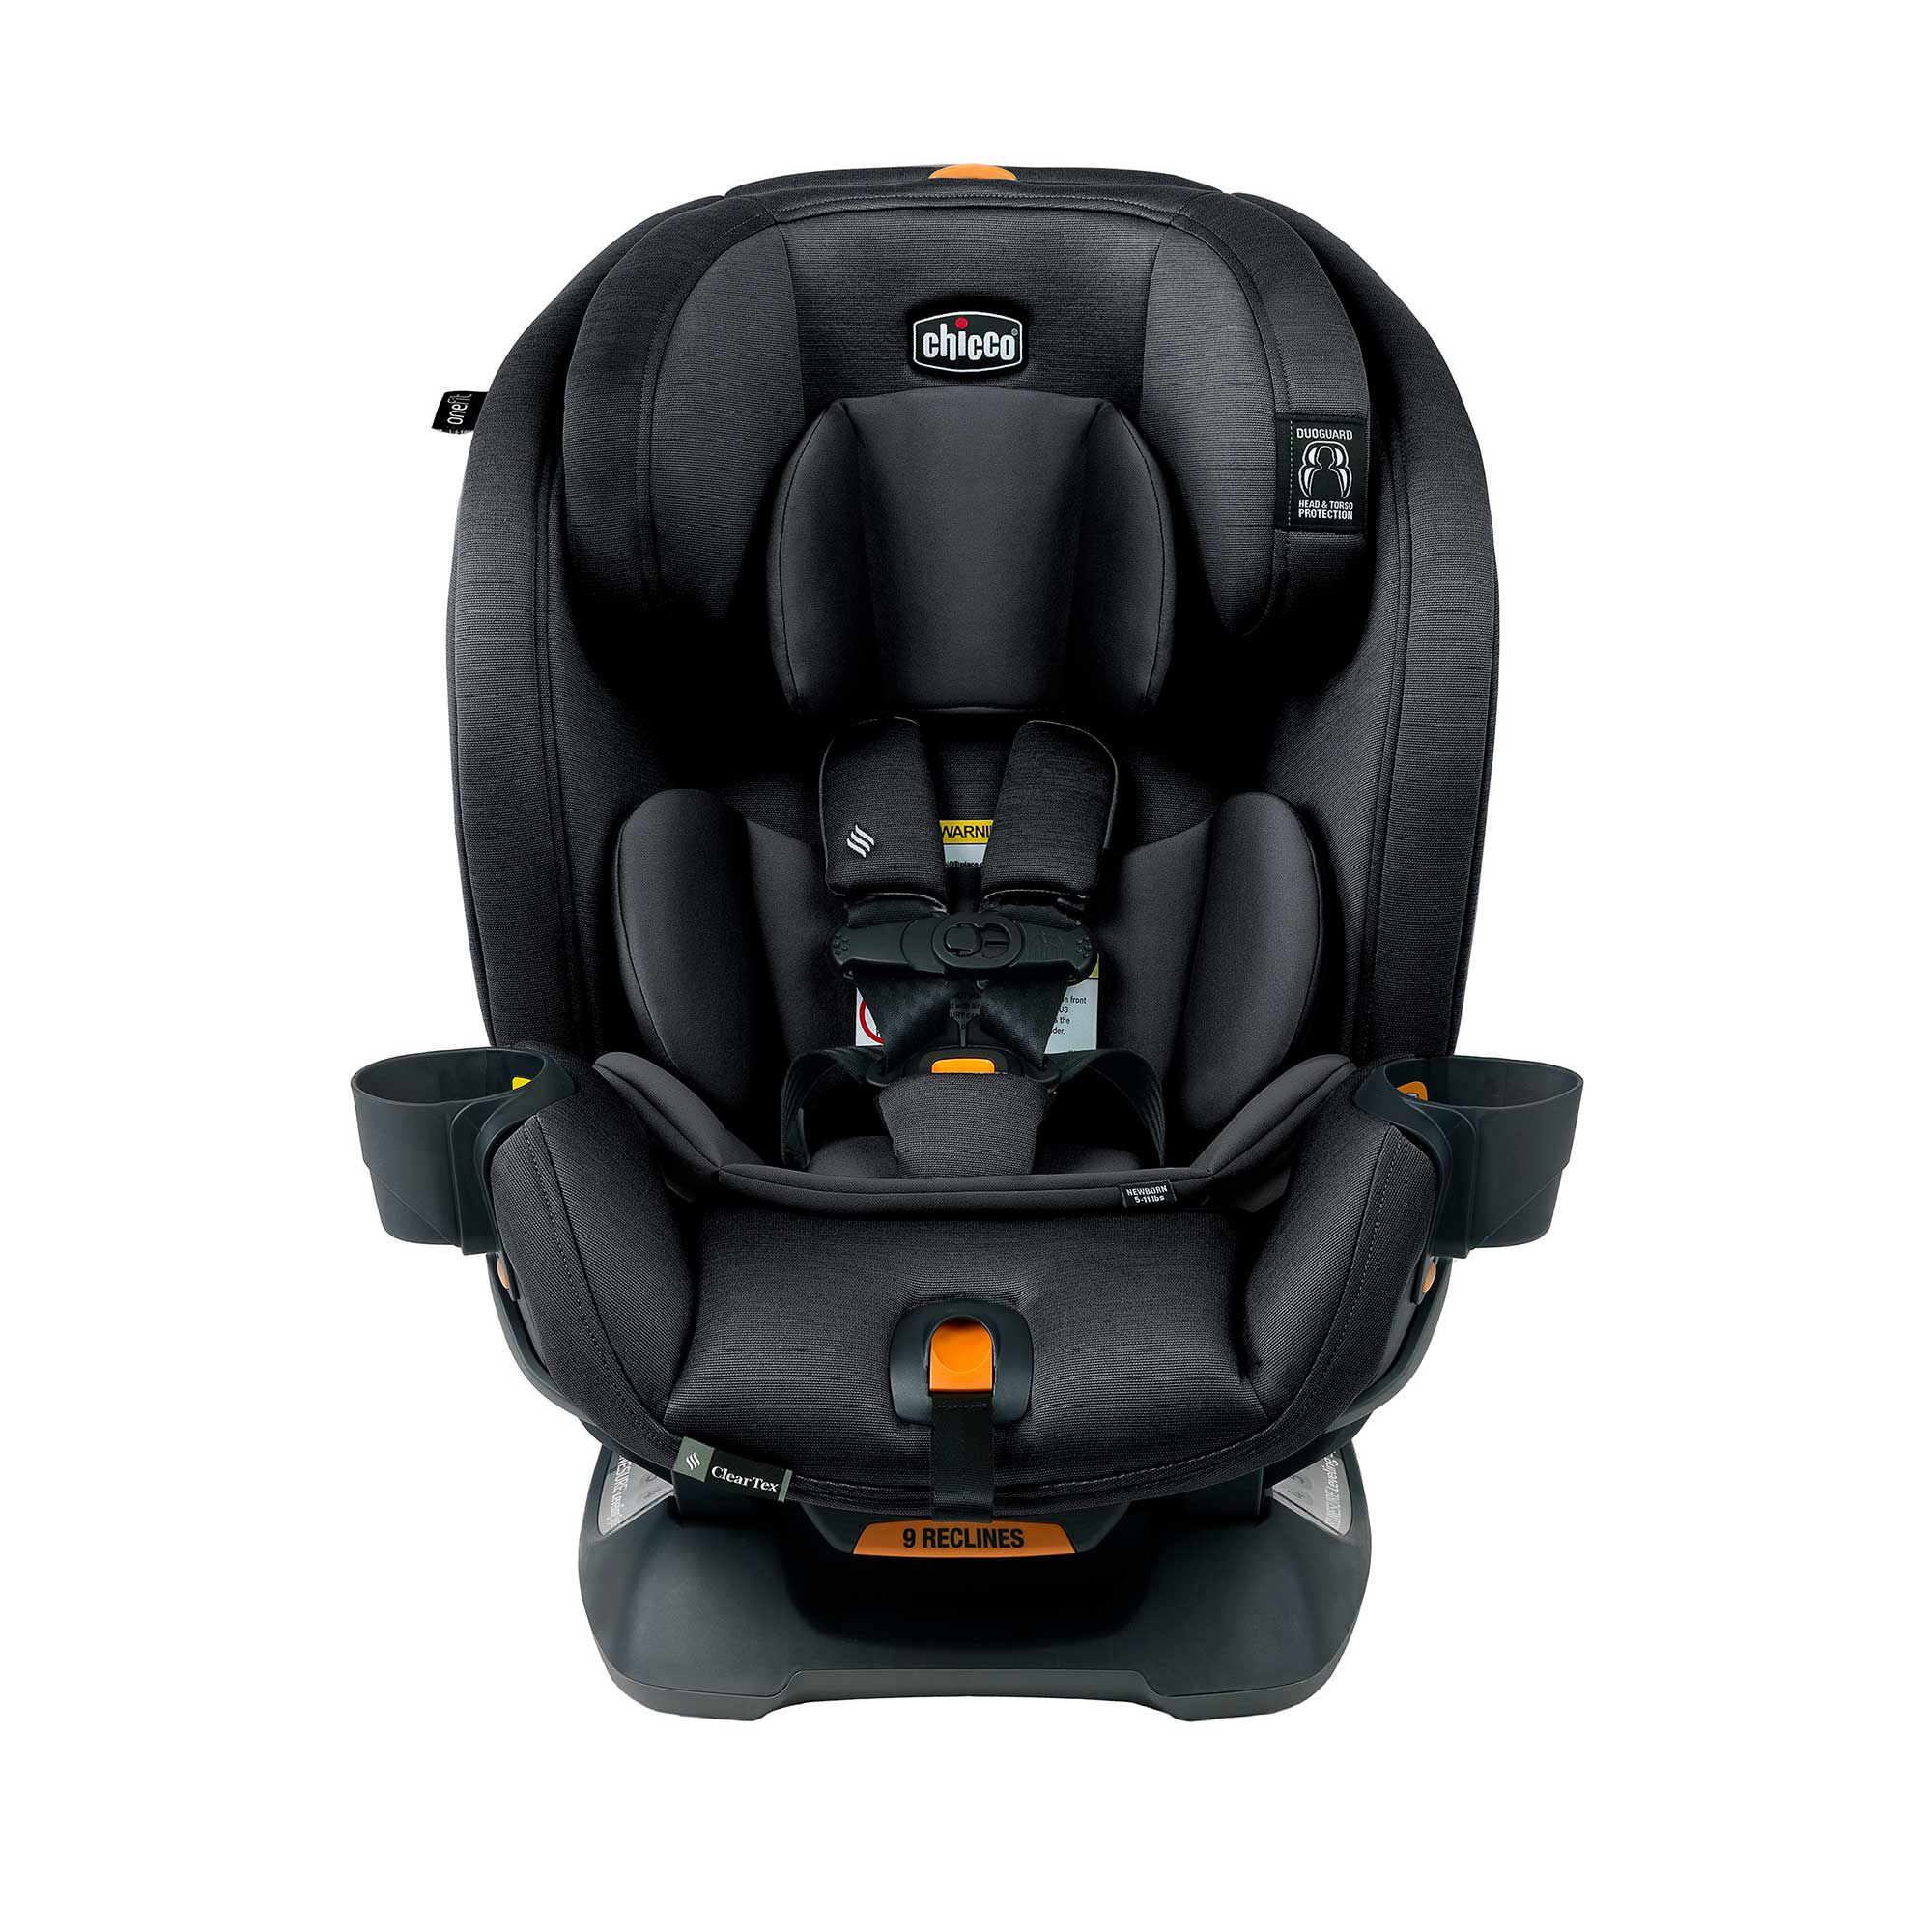 OneFit ClearTex All-in-One Car Seat - Obsidian